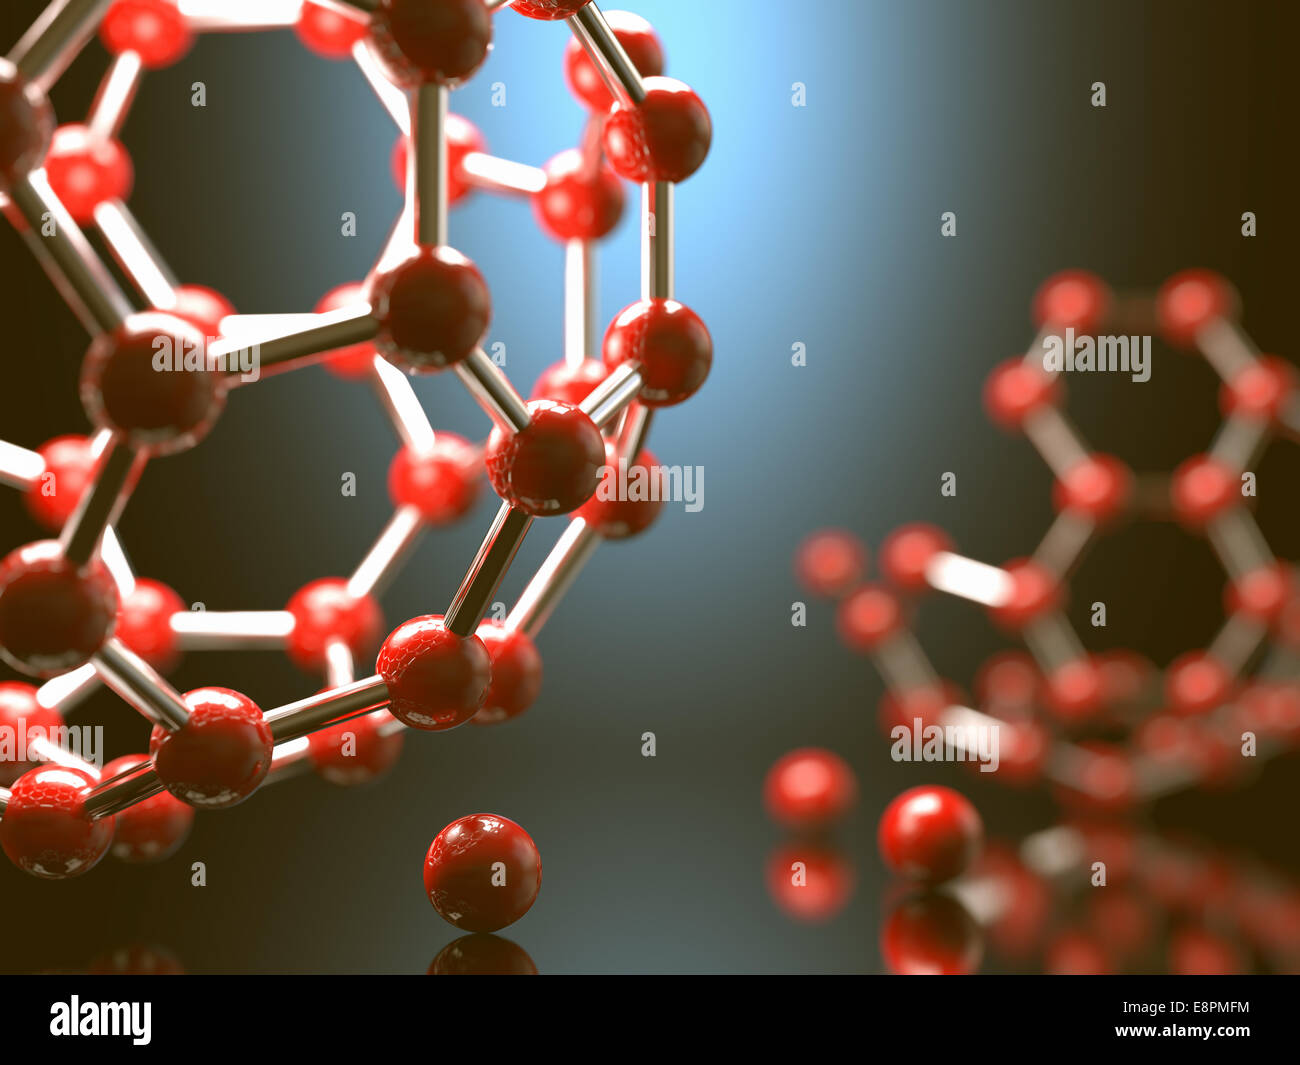 Molecular structure with red spheres interconnected with depth of field. Stock Photo